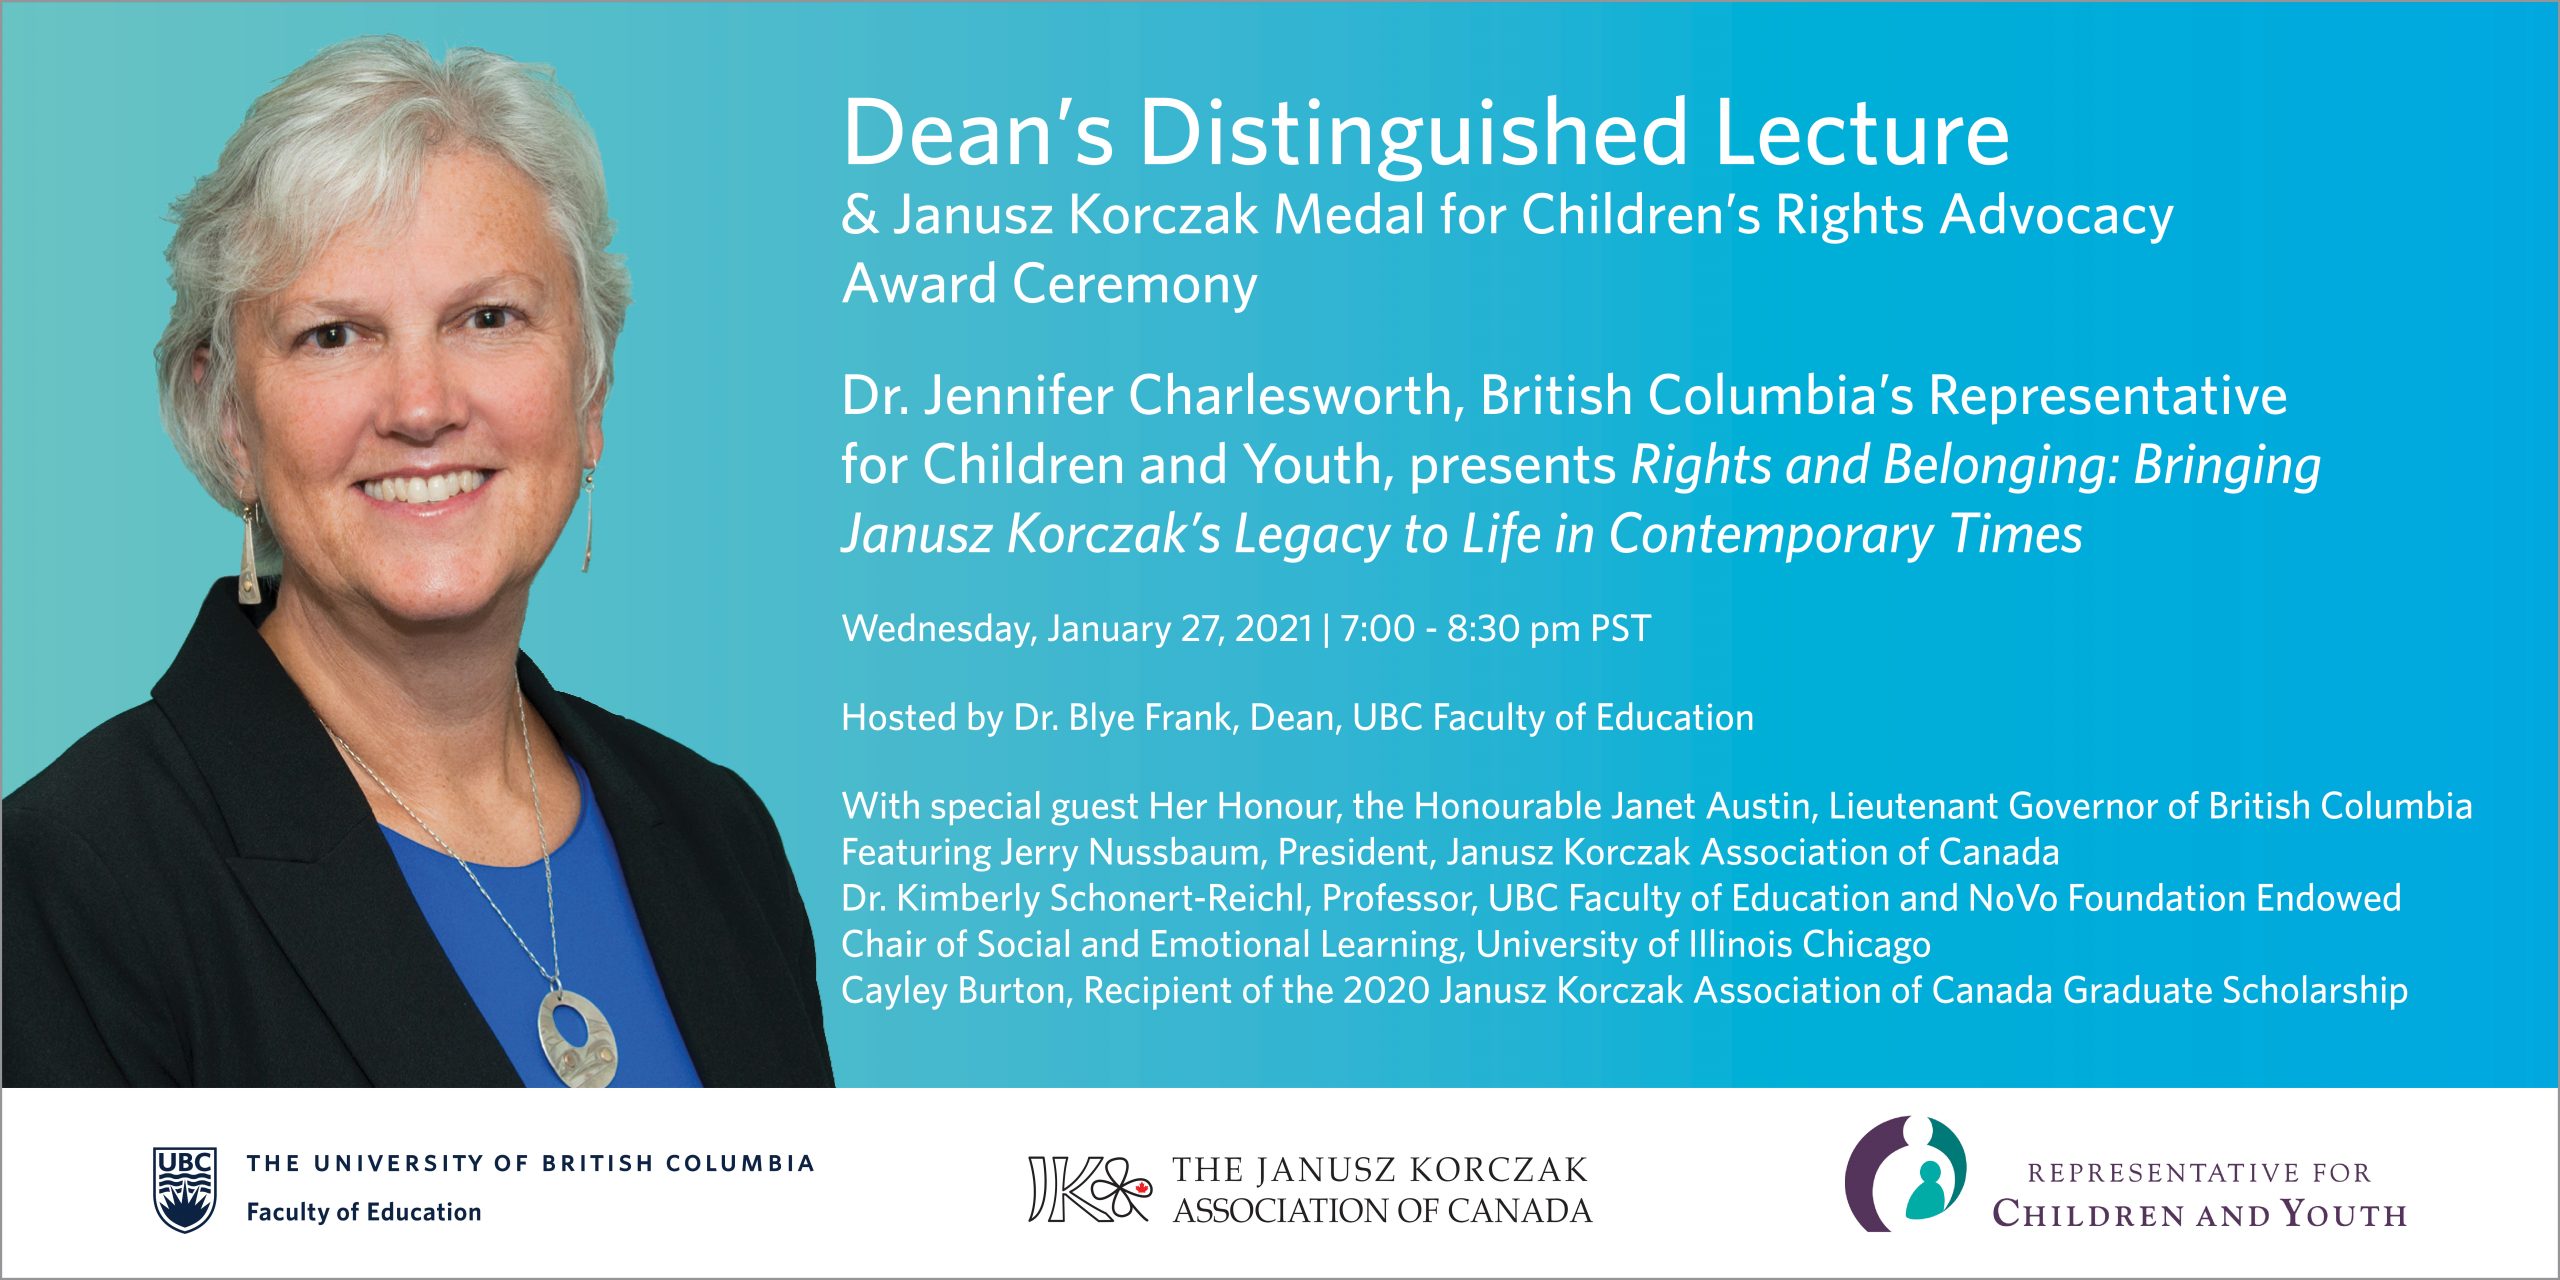 2021 Dean's Distinguished Lecture